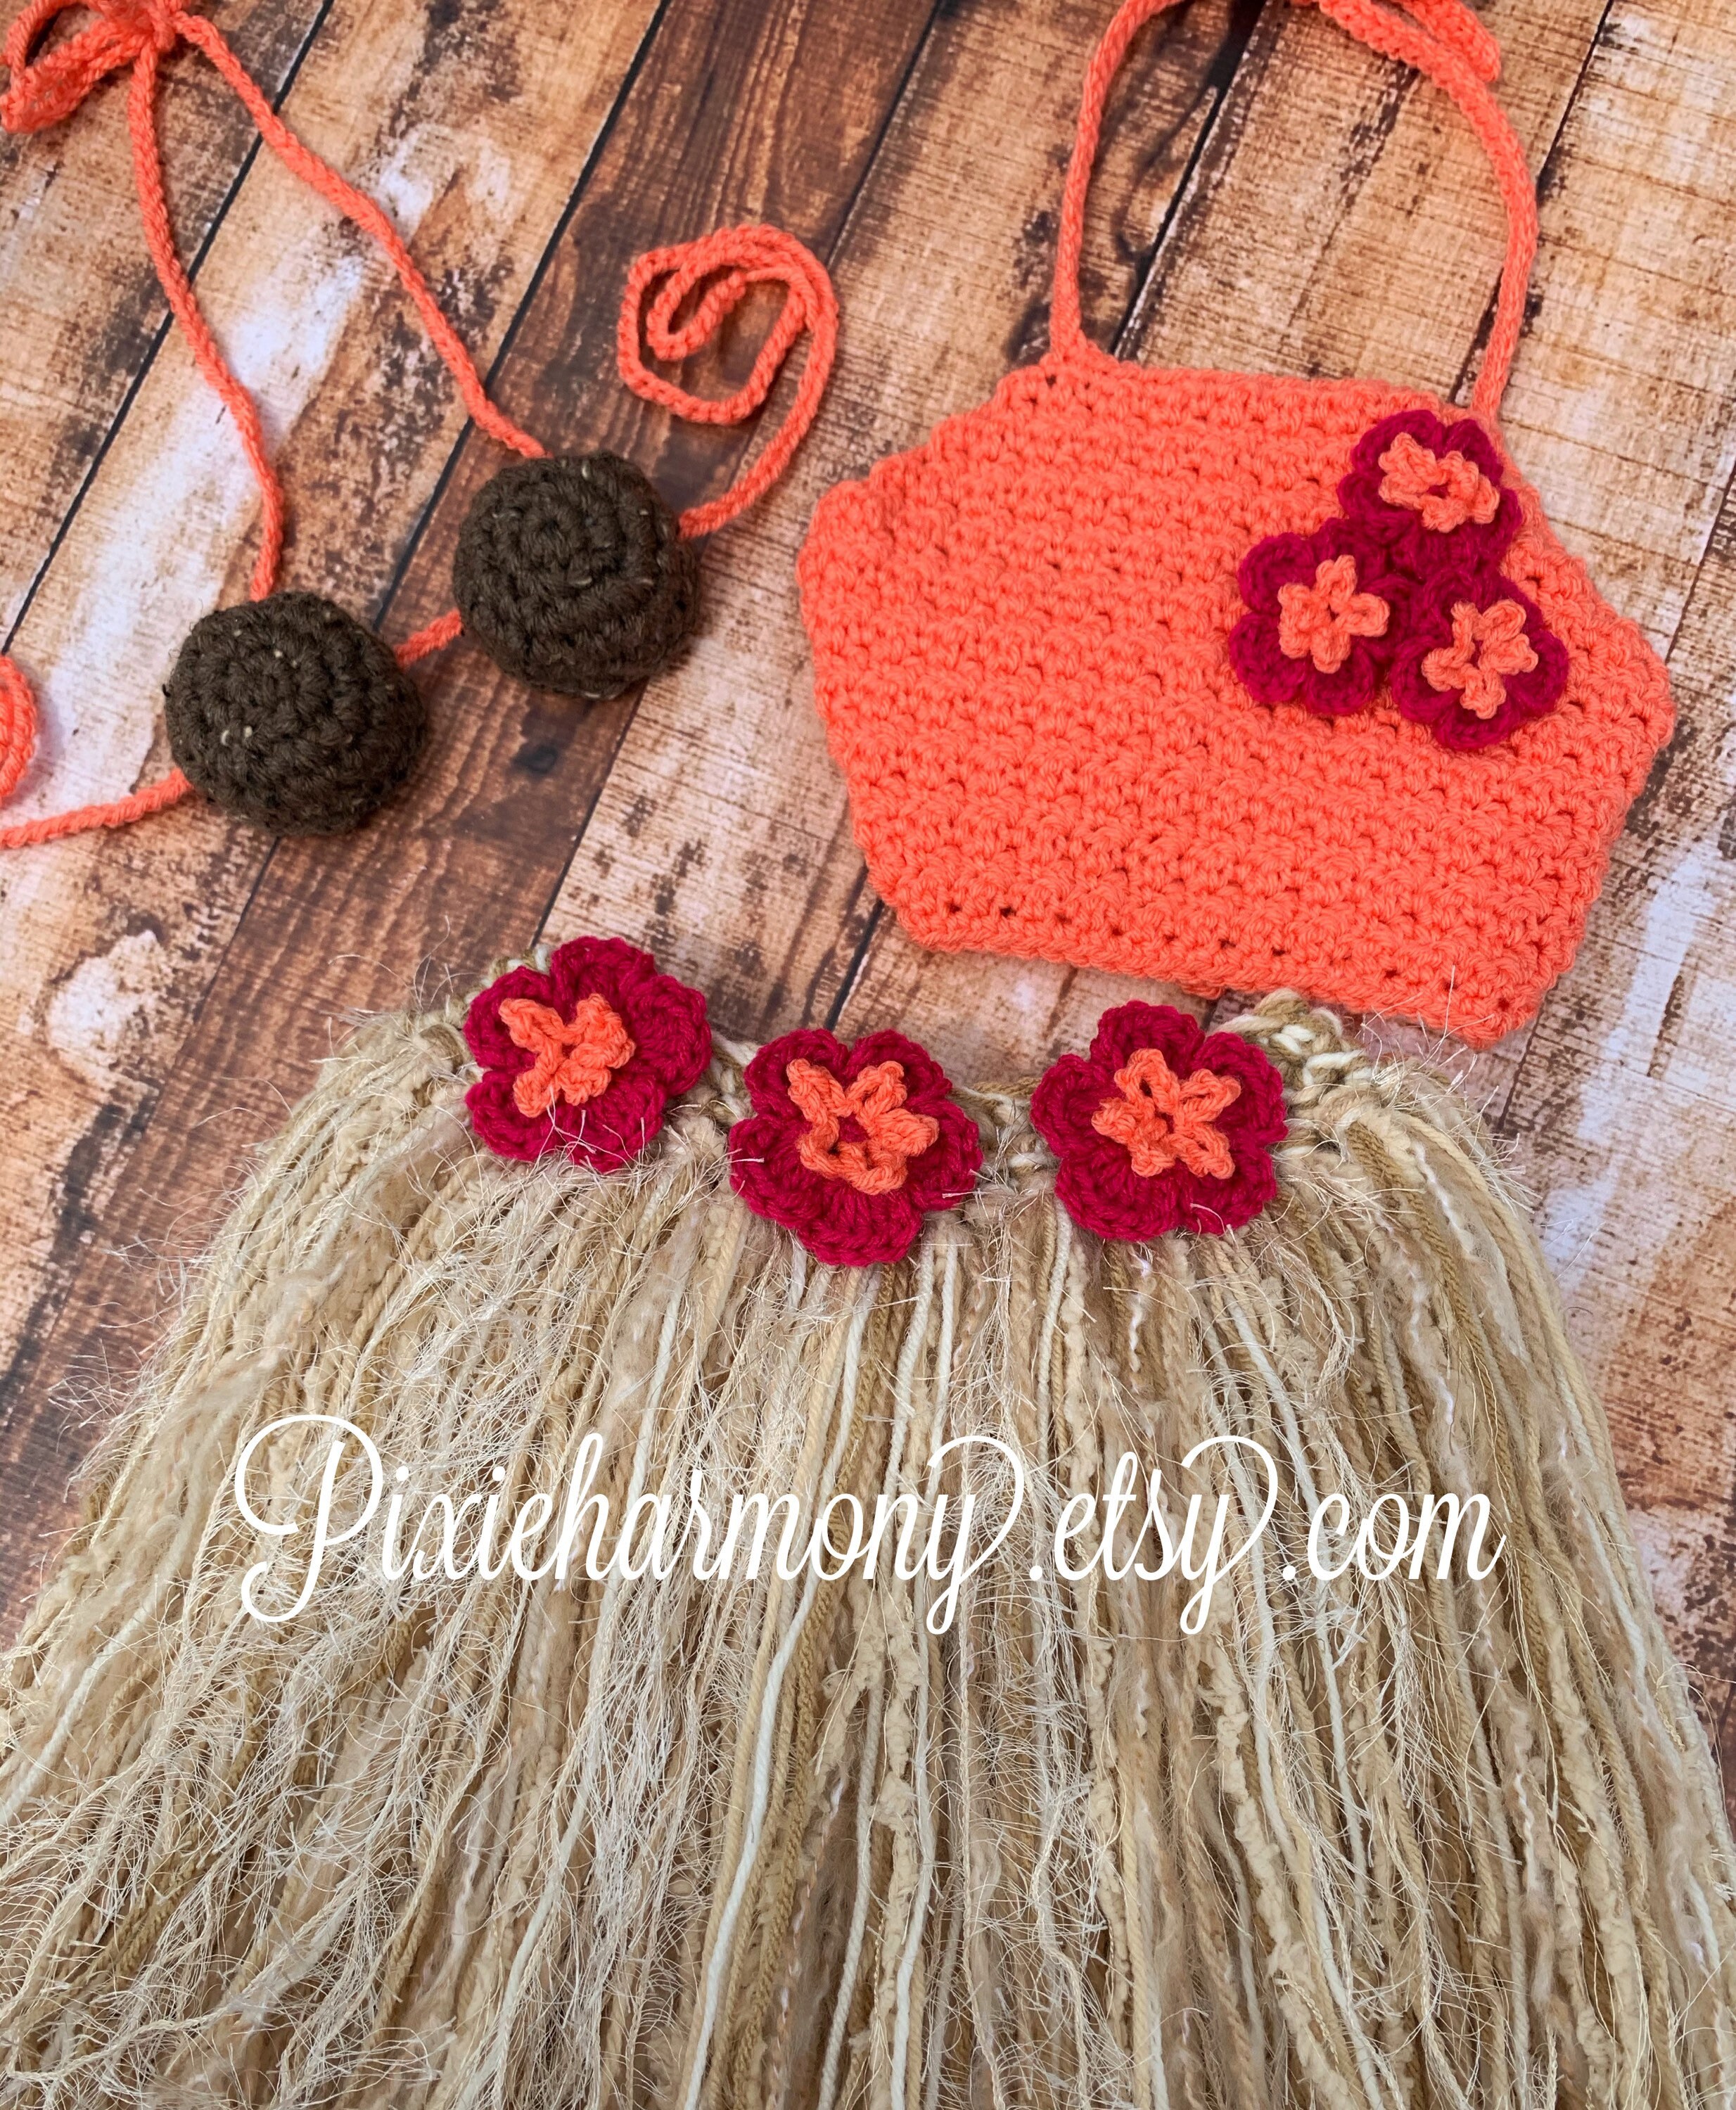 Crochet Moana Outfit for Sale in Dallas, TX - OfferUp